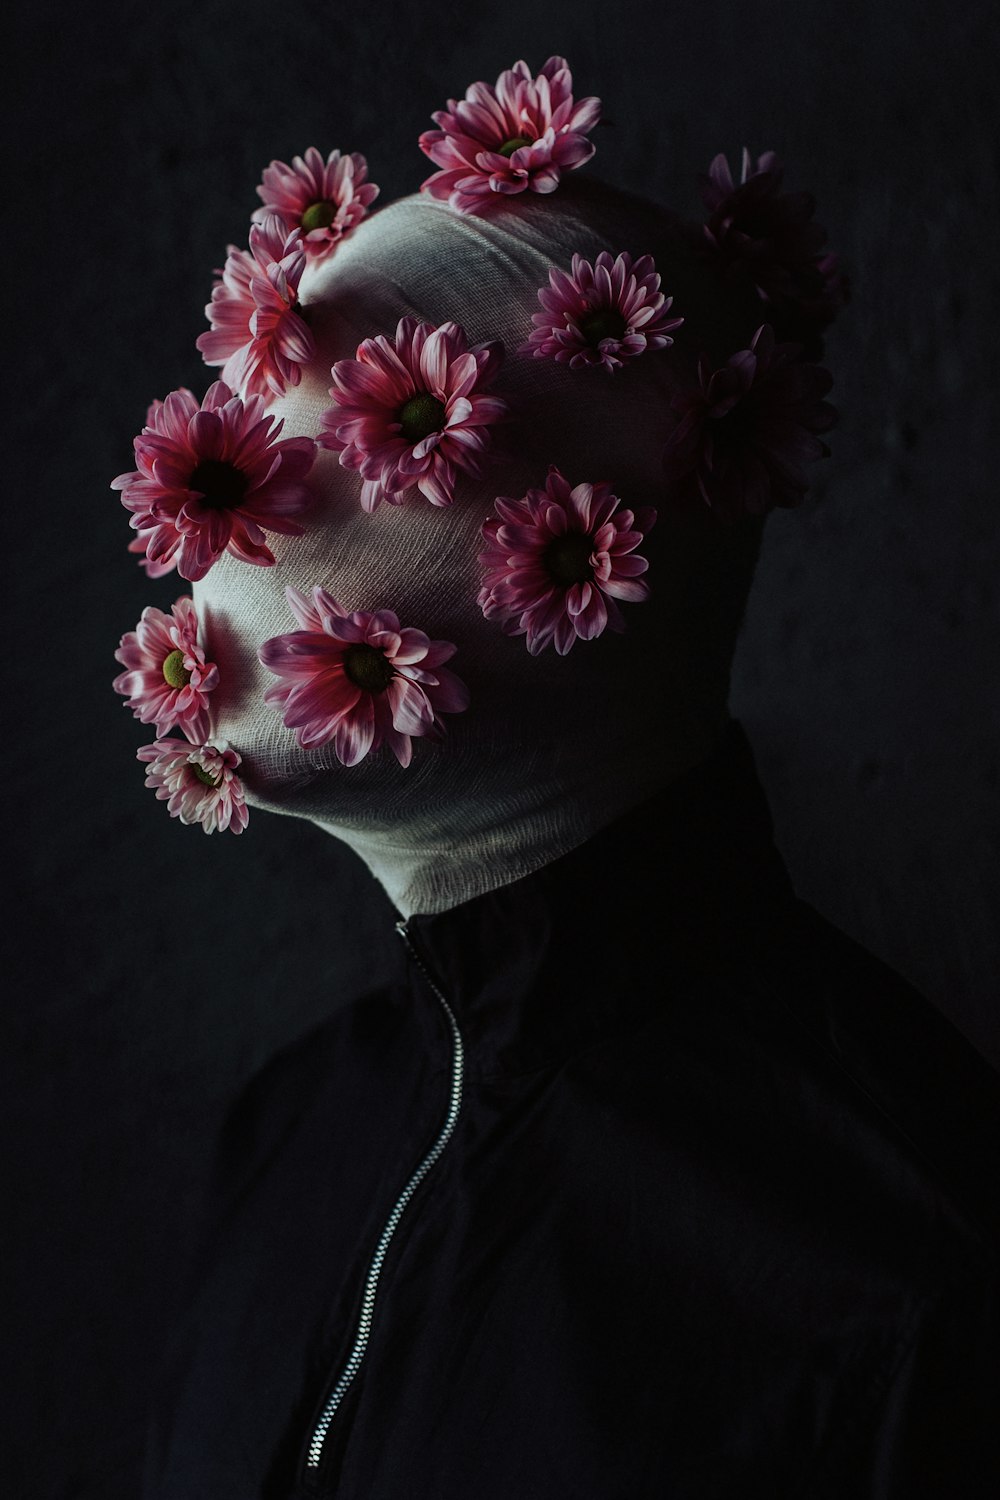 a person with flowers on their head in the dark